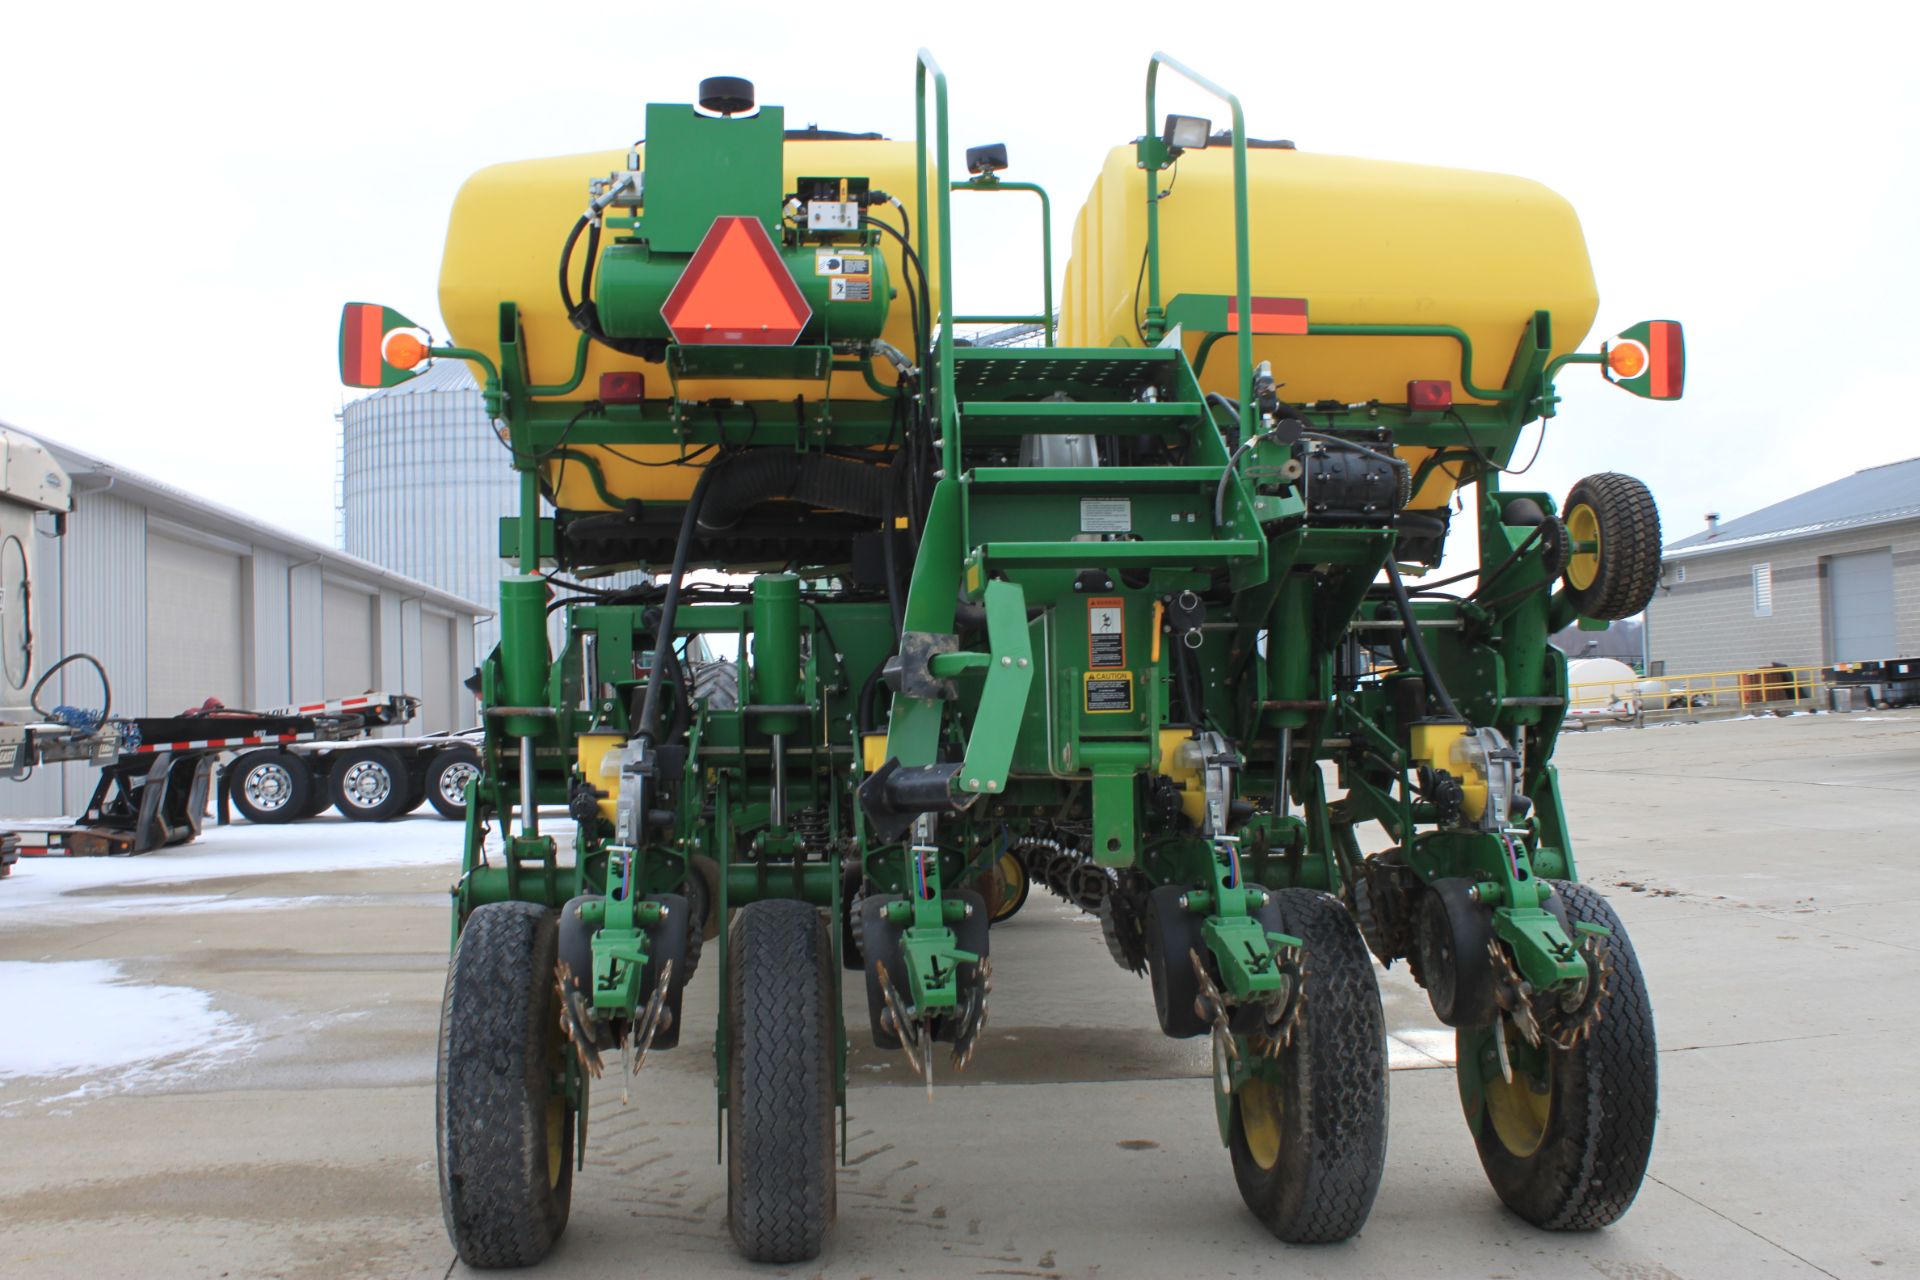 Planter 1770 (2013) - A01770CPDM755335 - 24 row 30"row spacing, active pneunamatic down force - Image 4 of 6